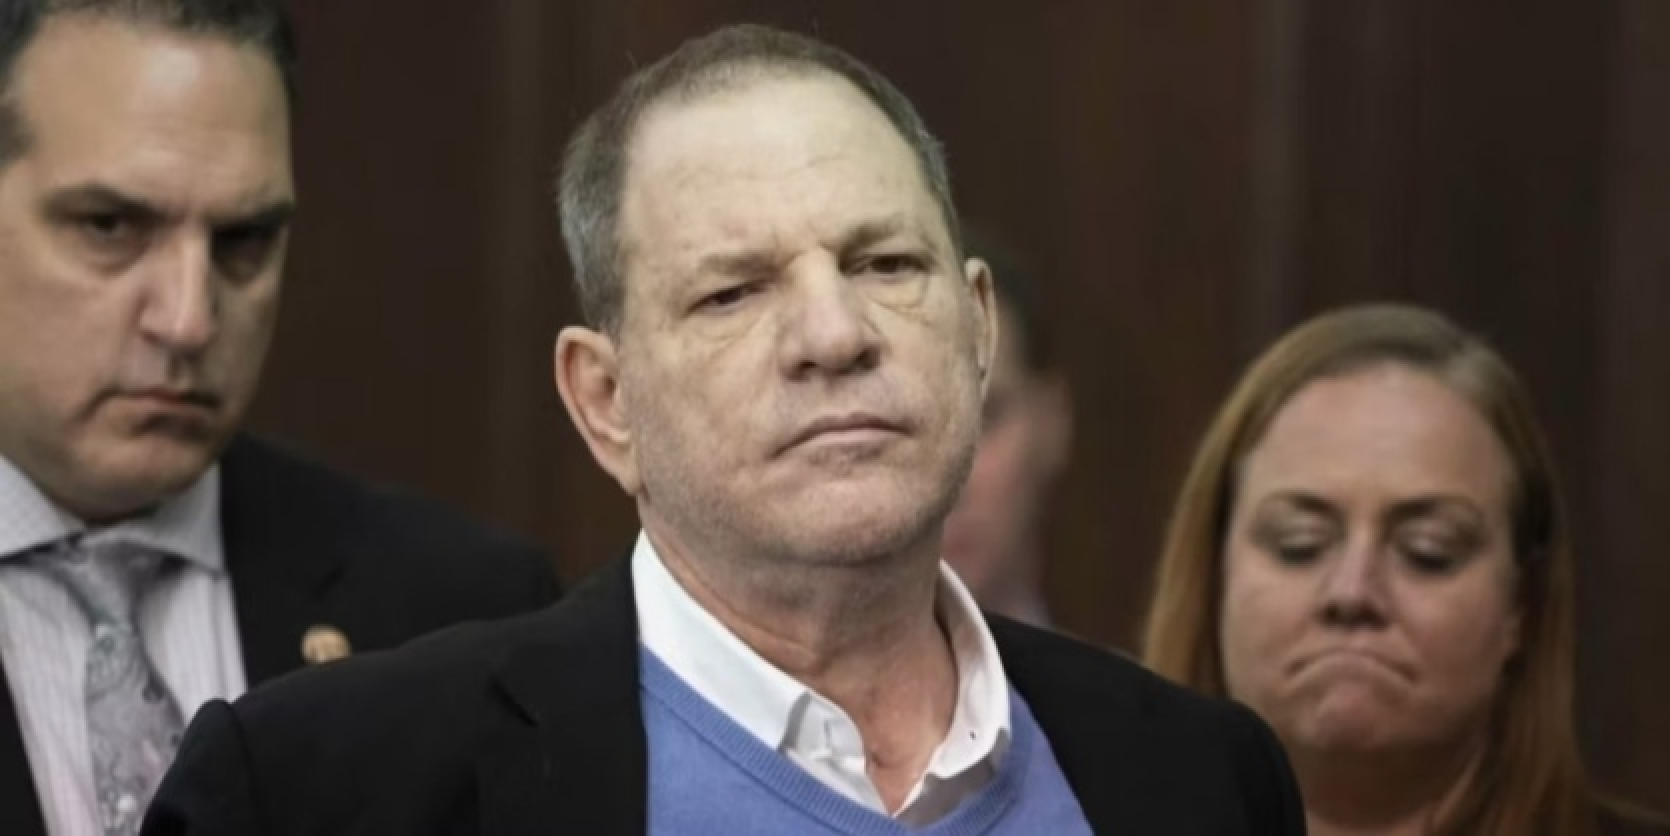 Harvey Weinstein's rape conviction overturned by court 4 years after conviction